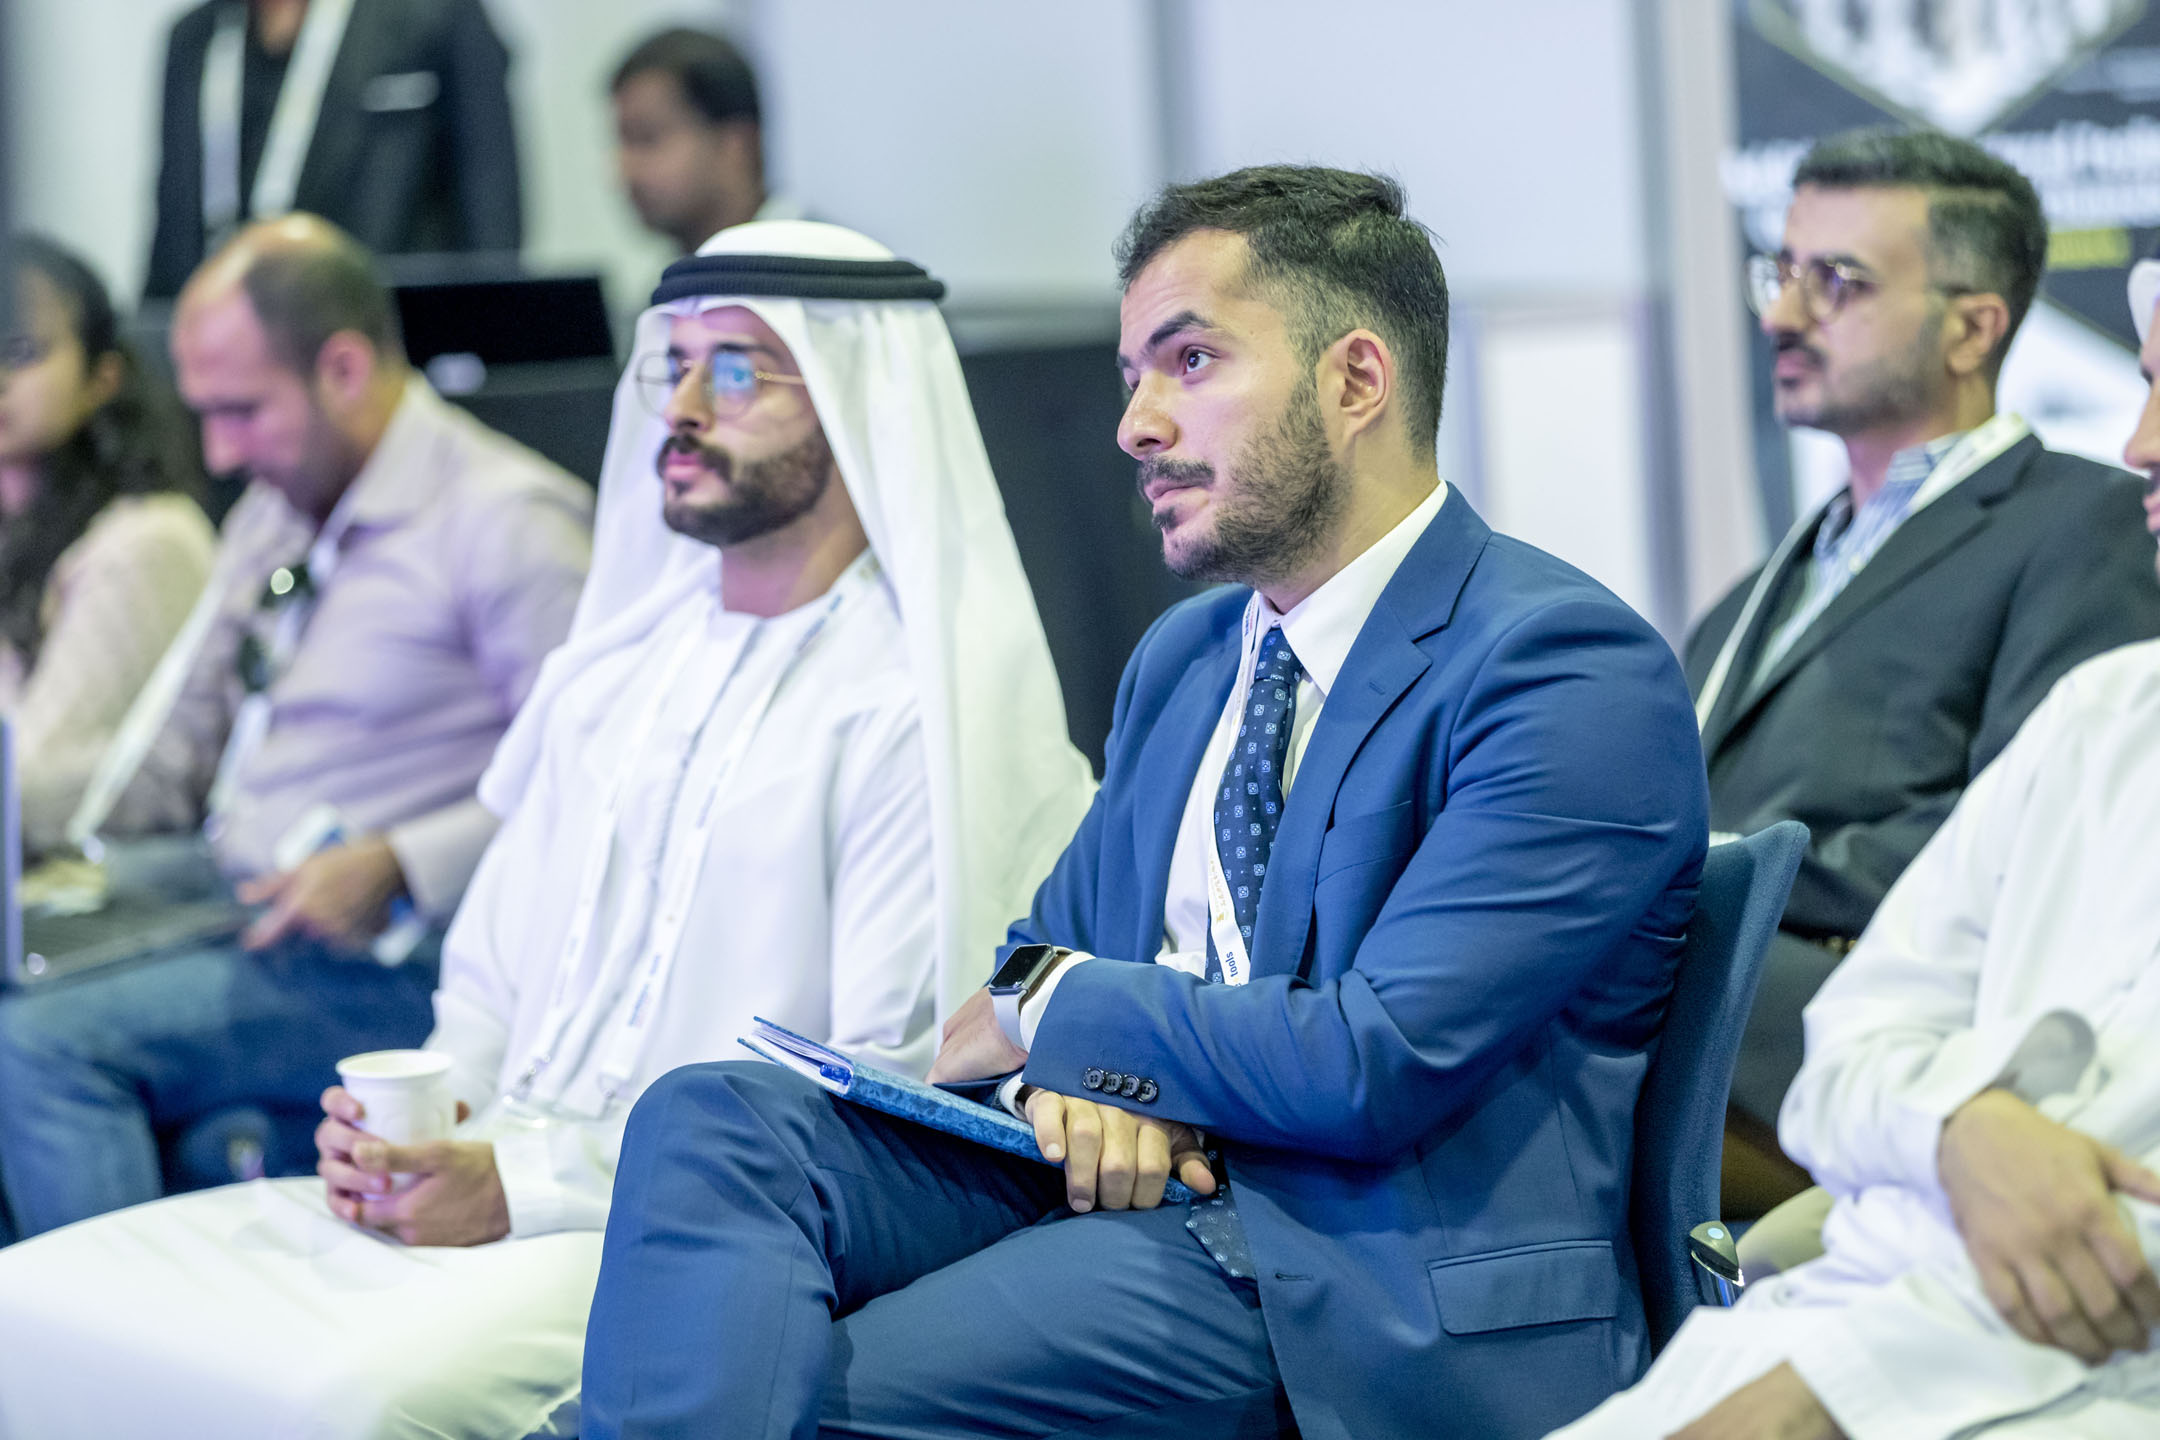 Hardware + Tools Middle East 2019